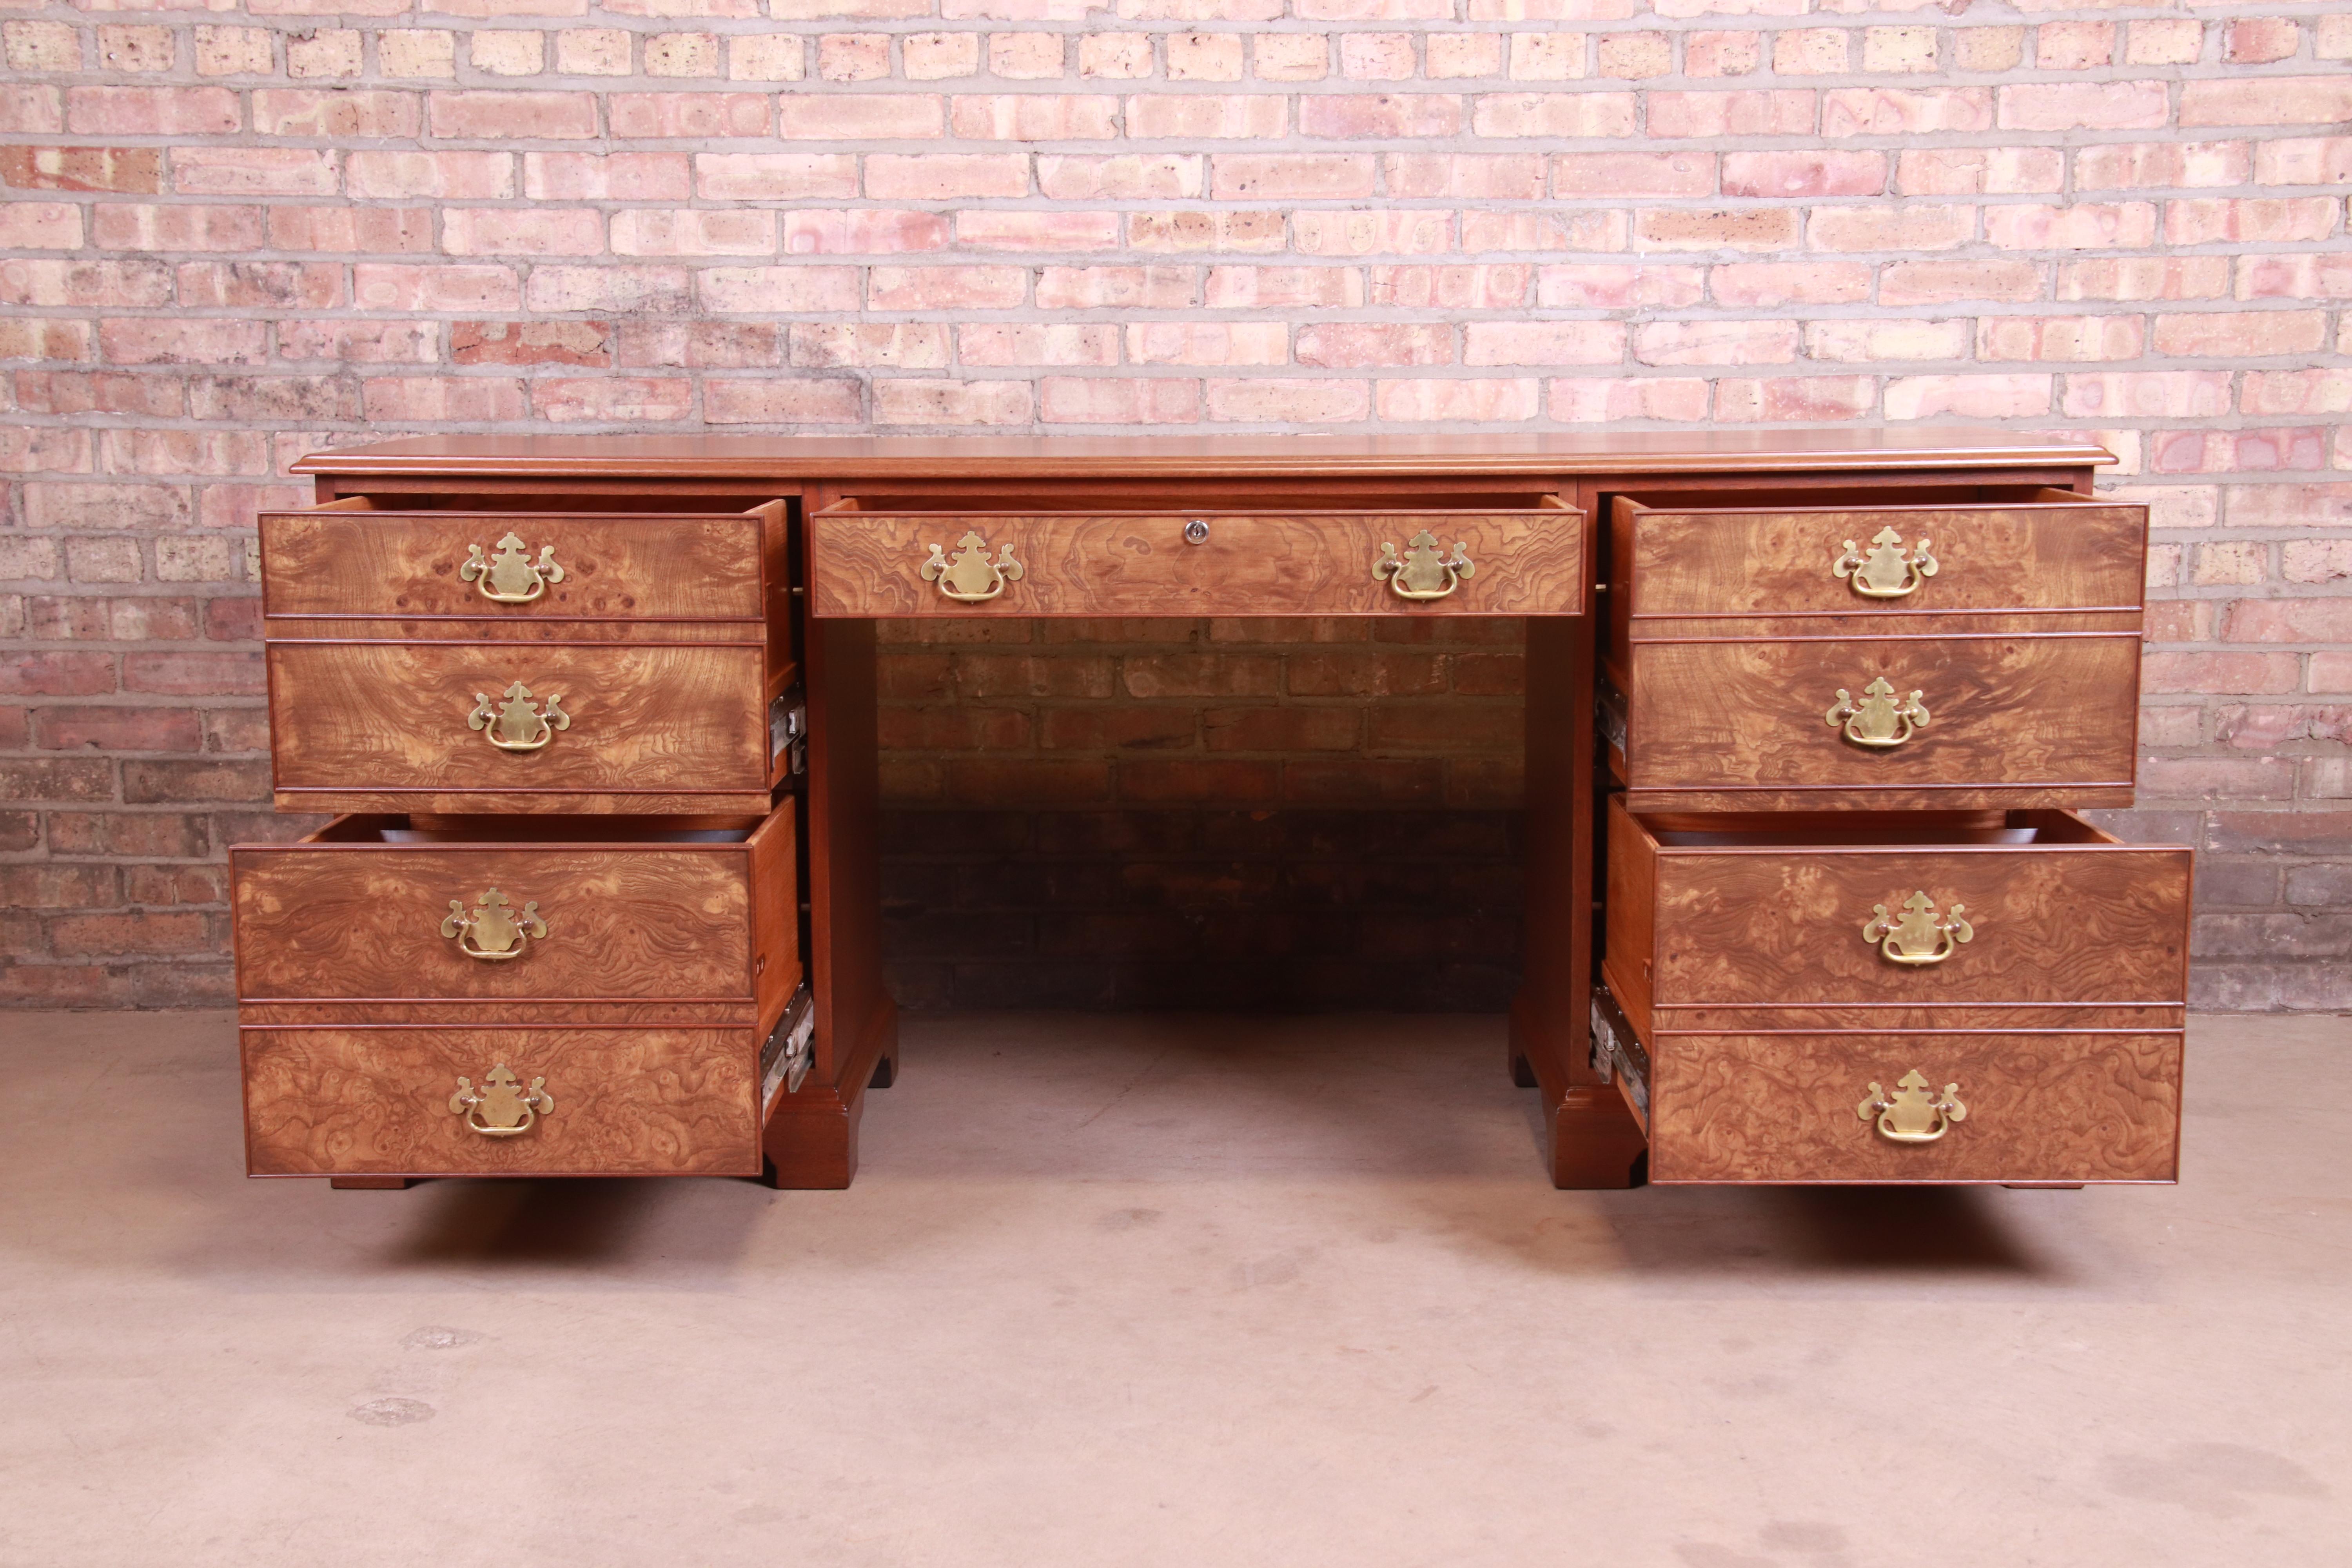 20th Century Kittinger Chippendale Burled Walnut and Mahogany Desk or Credenza, Refinished For Sale